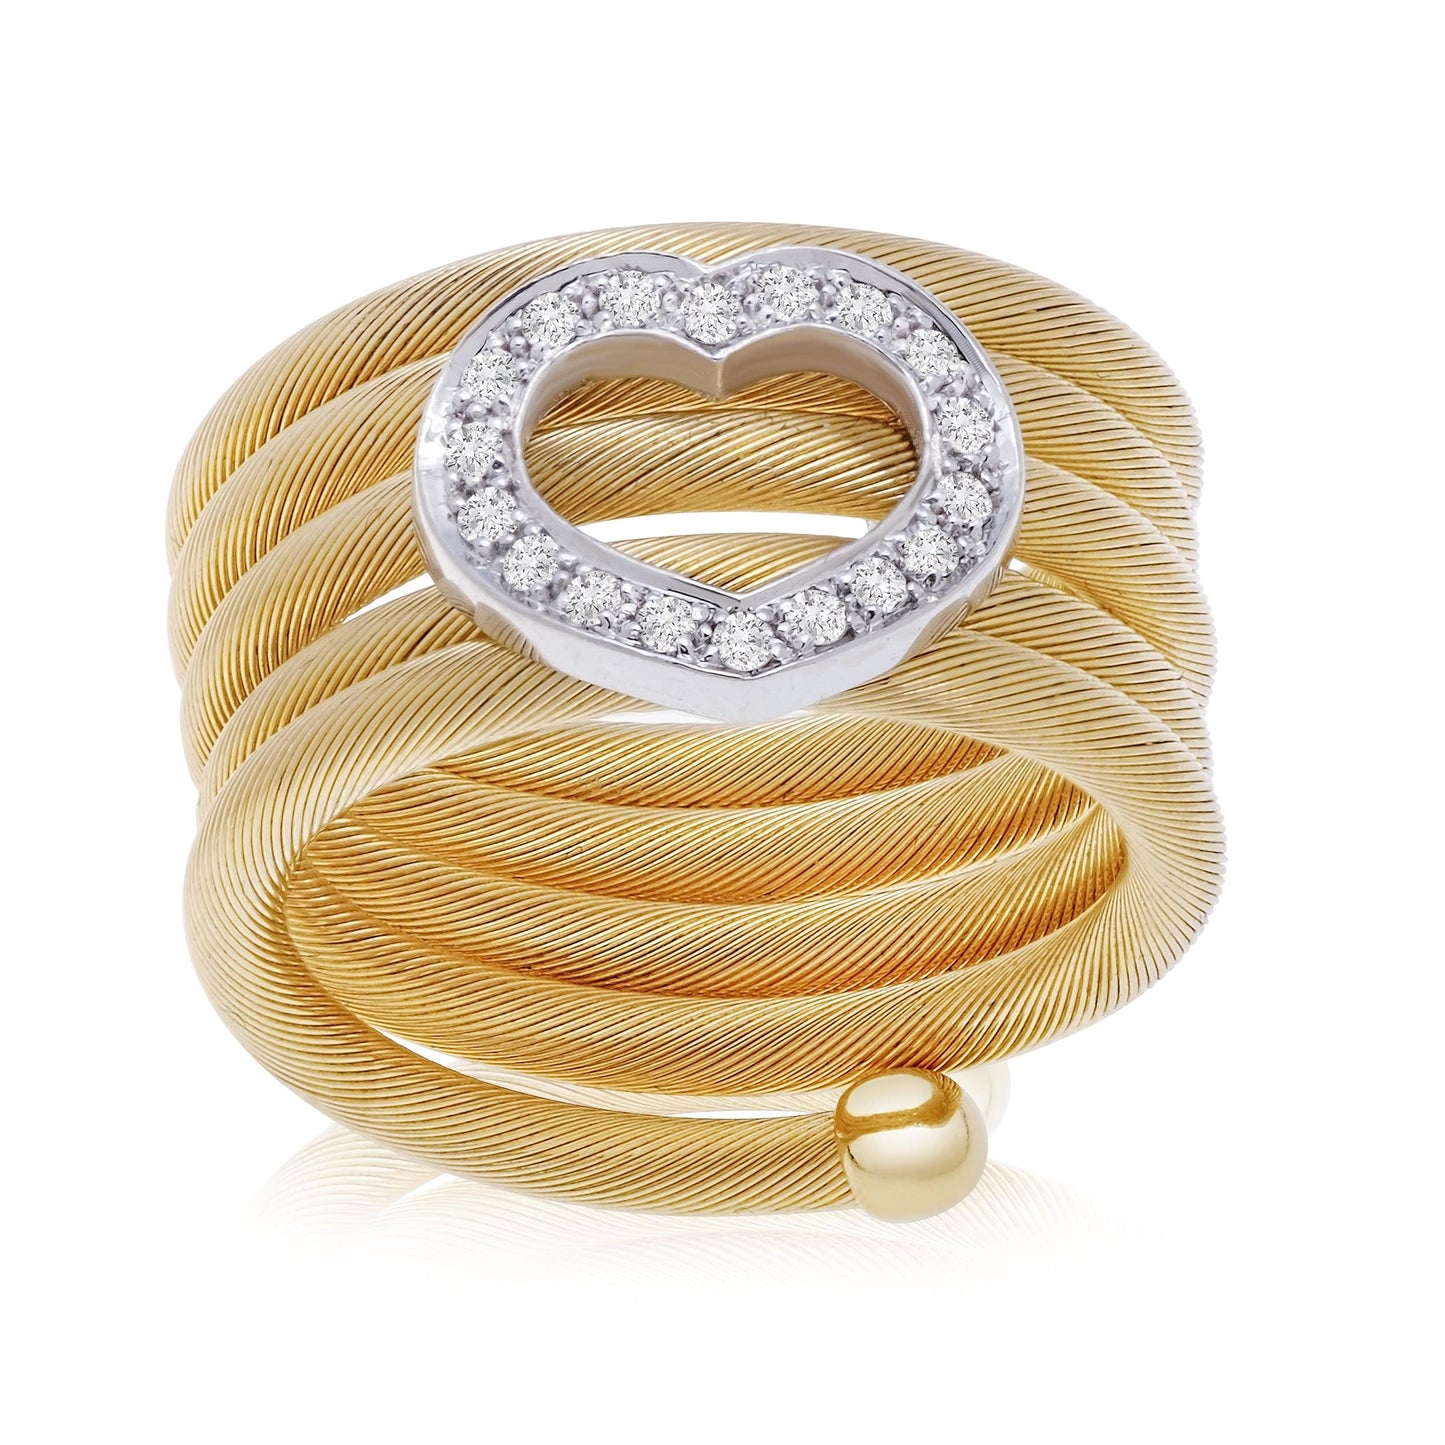 Dalia T Online Ring Signature Collection 14KT YW Gold Flexi Coil Ring with a Diamond Heart.